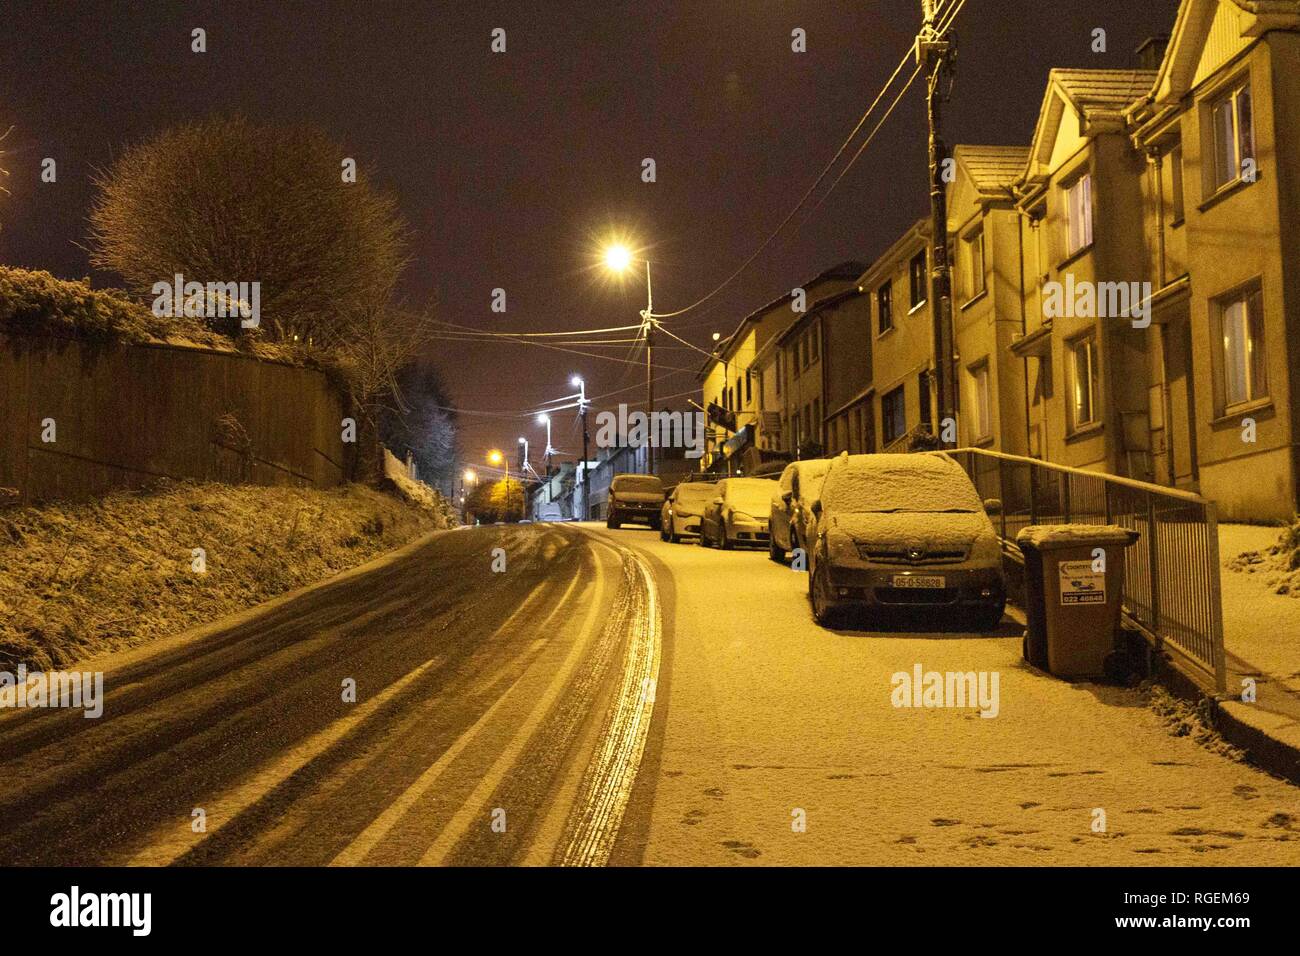 Cork, Ireland, 29th January, 2019.   Snow in Ballyvolane, Cork City. Today a Yellow Weather Warning was put in place across the country by MET Eireann for ice and snow. Heavy snowfall hit parts of Cork City and County throughout the day making some roads treacherous and driving particularly dangerous throughout the city. Pictured here is the snow throughout the Ballyvolane/ Dublin Hill Area. Credit: Damian Coleman/Alamy Live News. Stock Photo